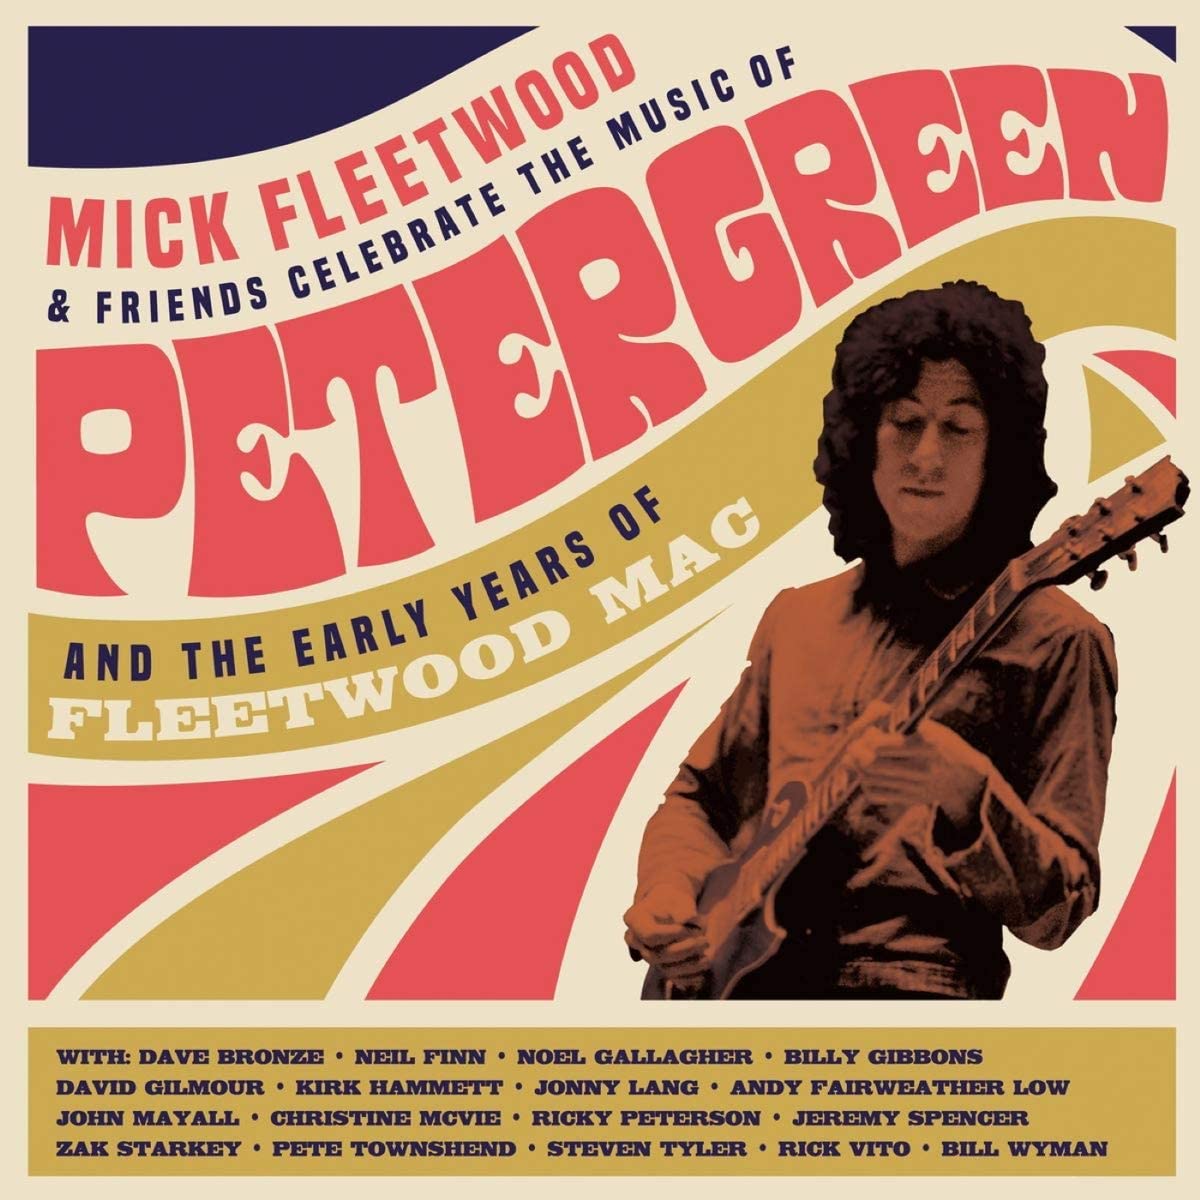 MICK FLEETWOOD & FRIENDS - Celebrate The Music of Peter Green and the Early Years of Fleetwood Mac - 2CD